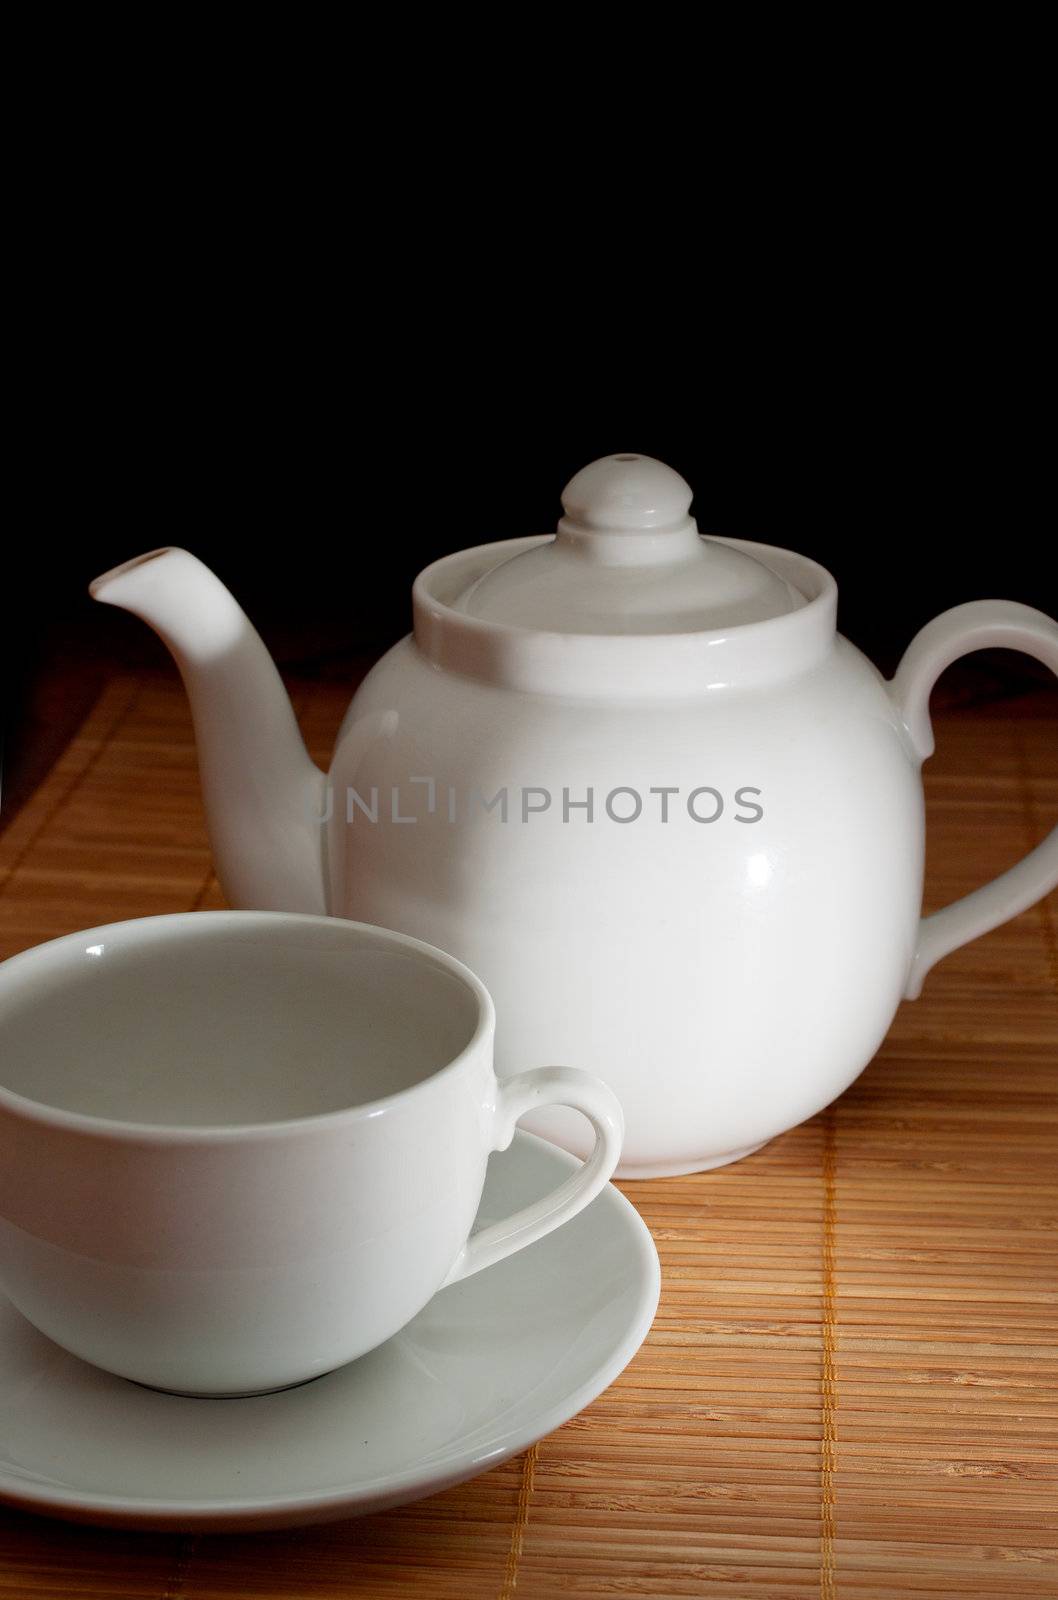 Cup and teapot on the bamboo napkin